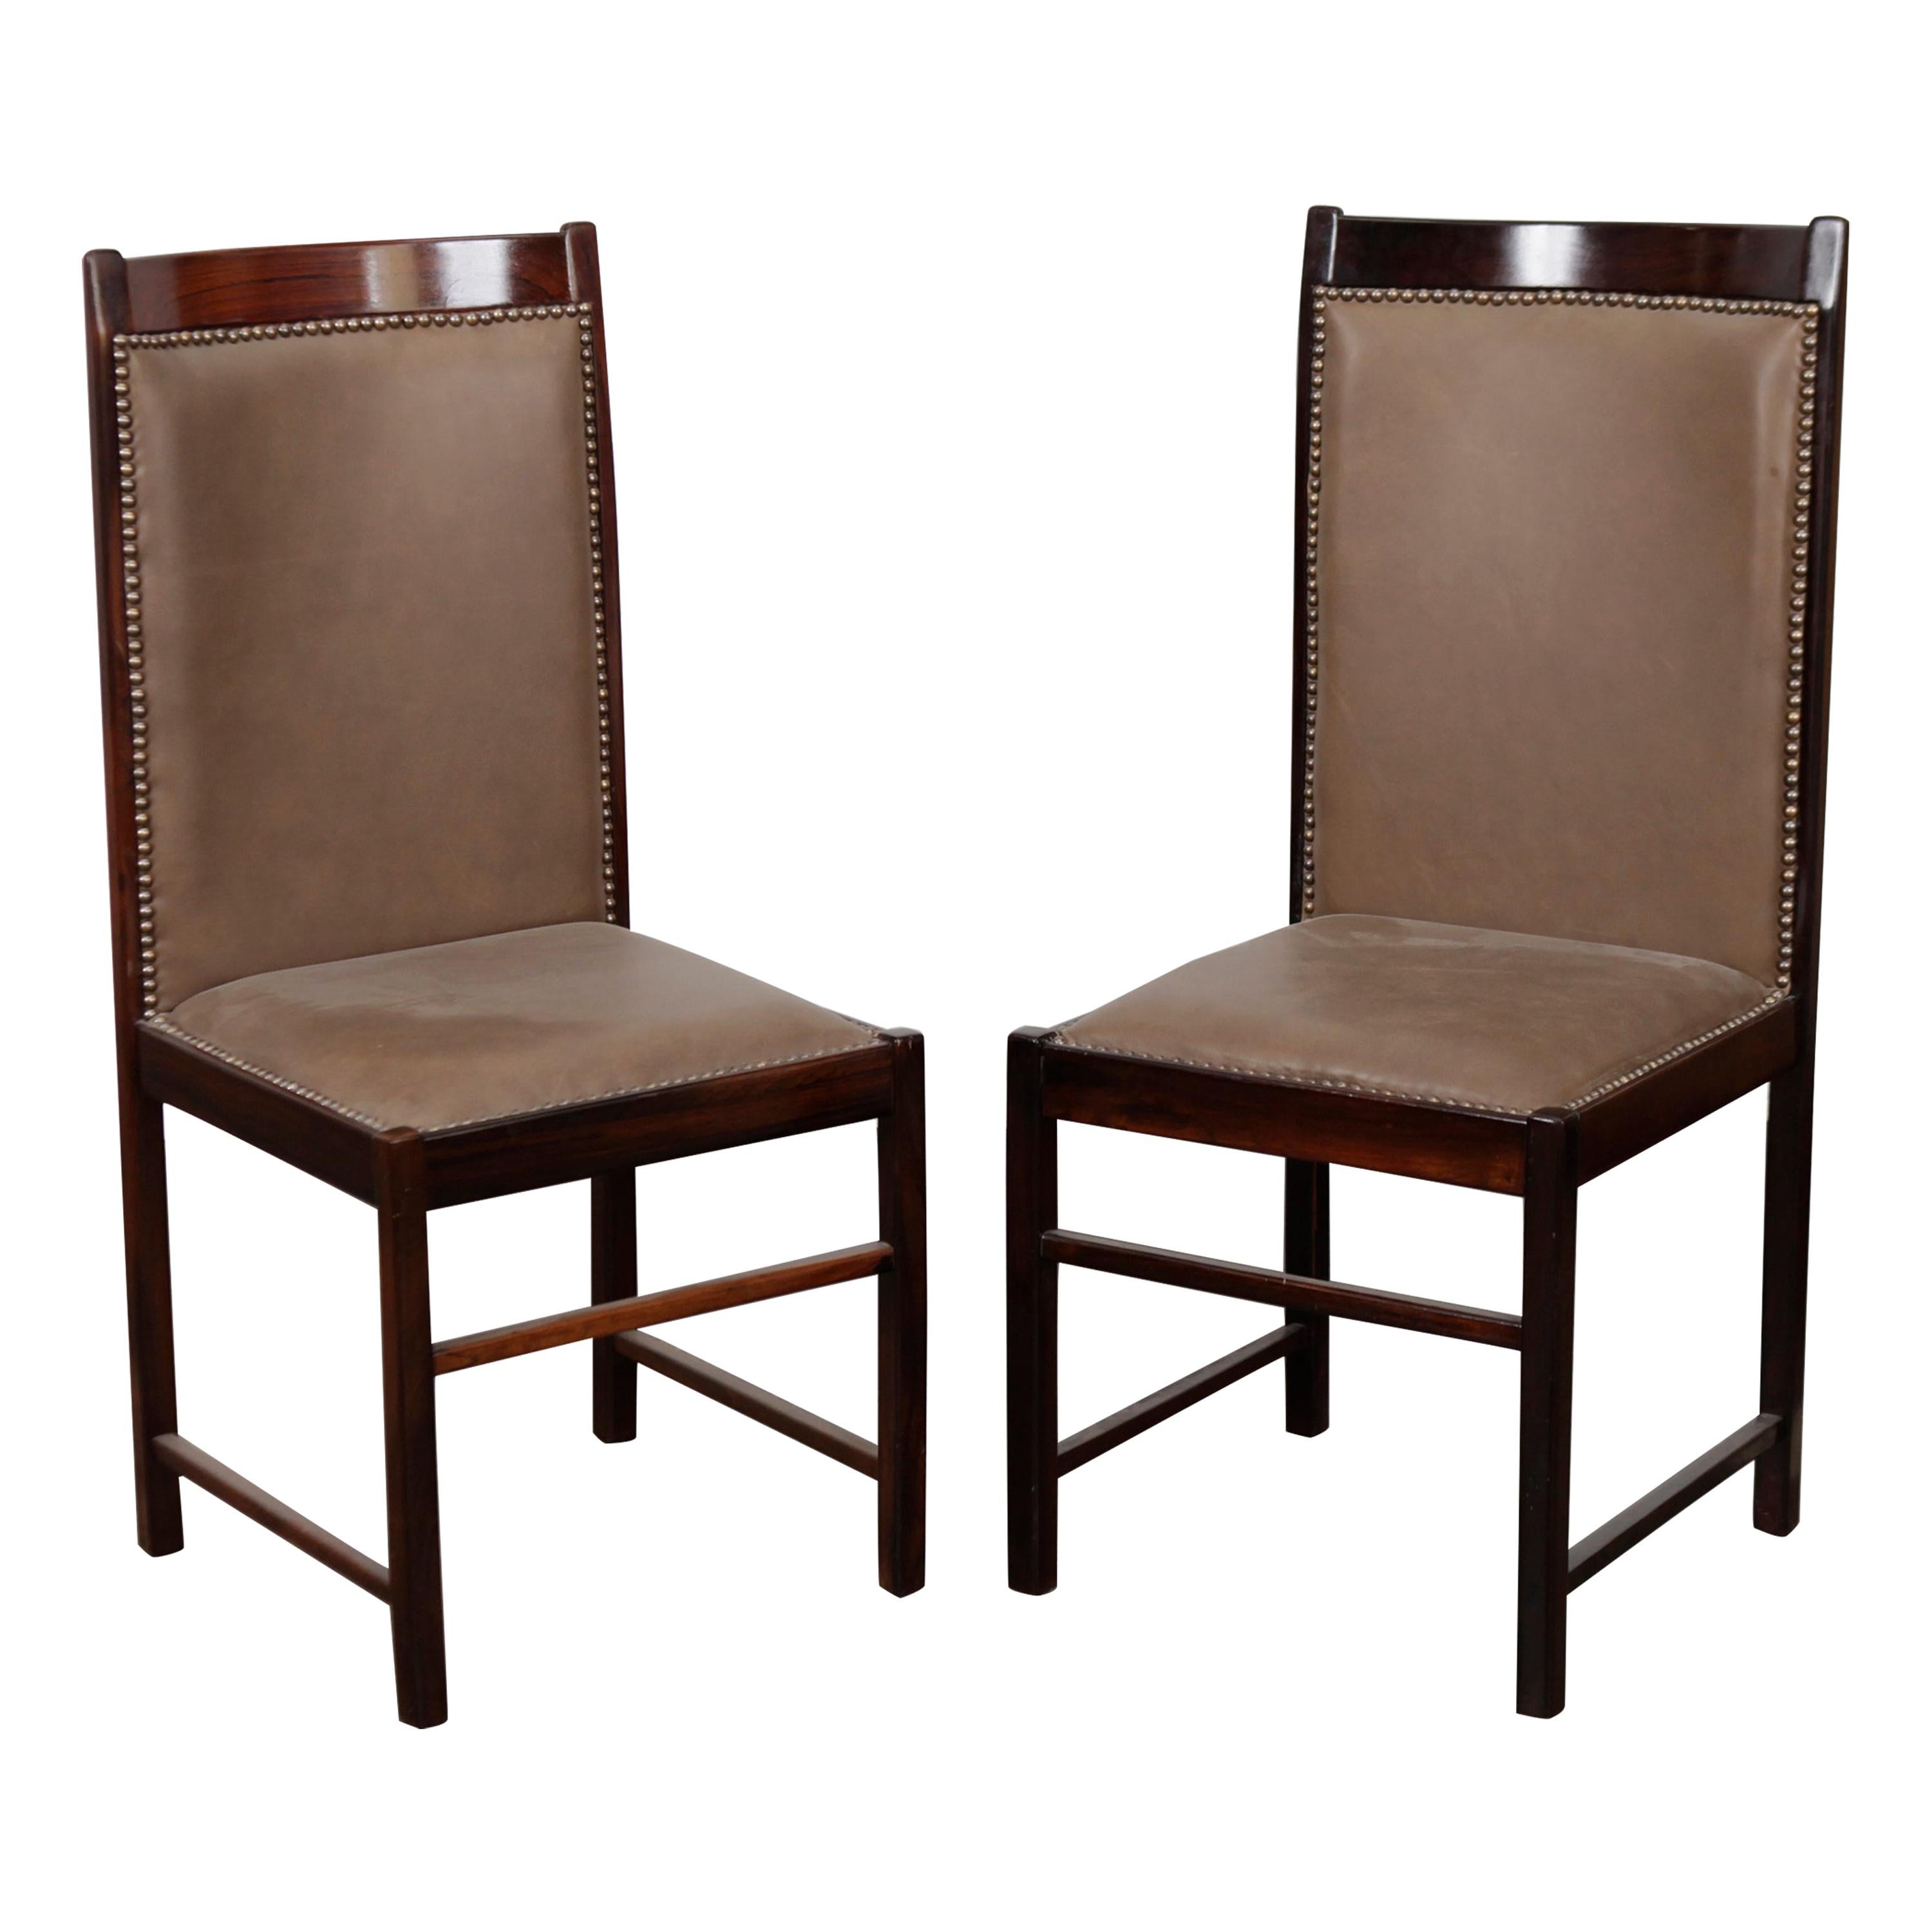 Pair of 1960s Brazilian Tall Back Dining Chairs by Celina Moveis For Sale